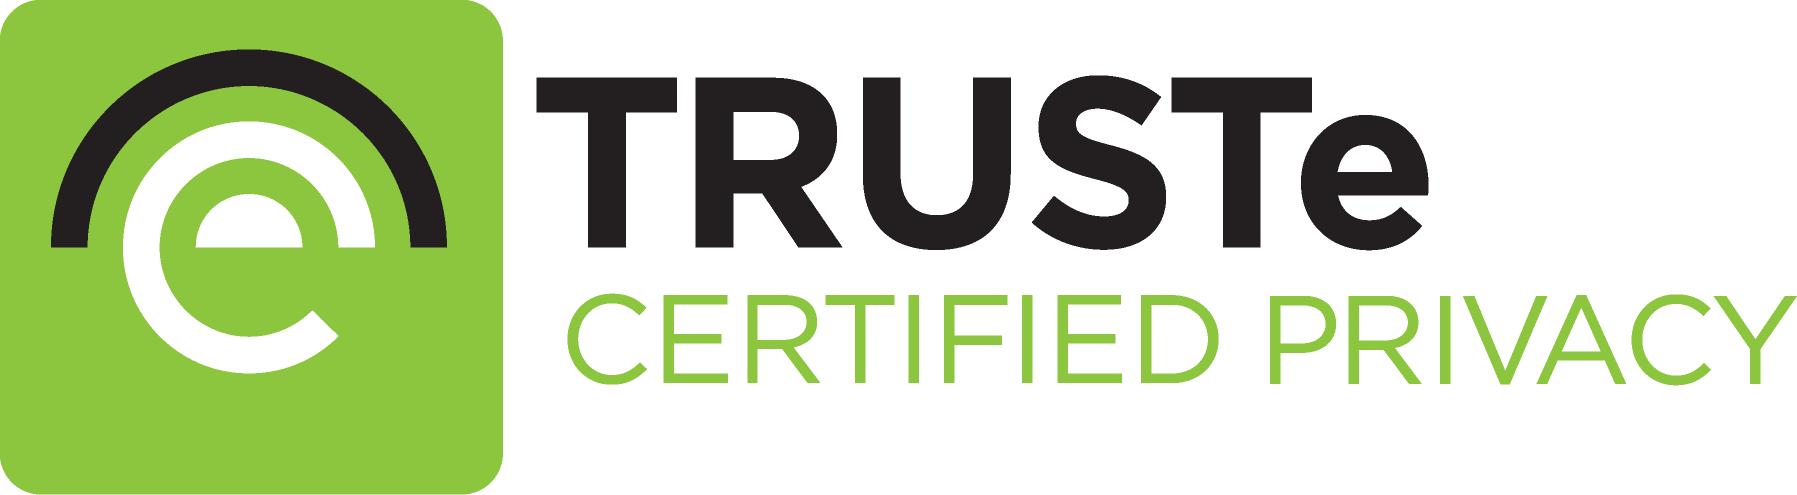 TRUSTe To Pay $200K Fine In Settlement With FTC Over Allegations It Deceived Consumers